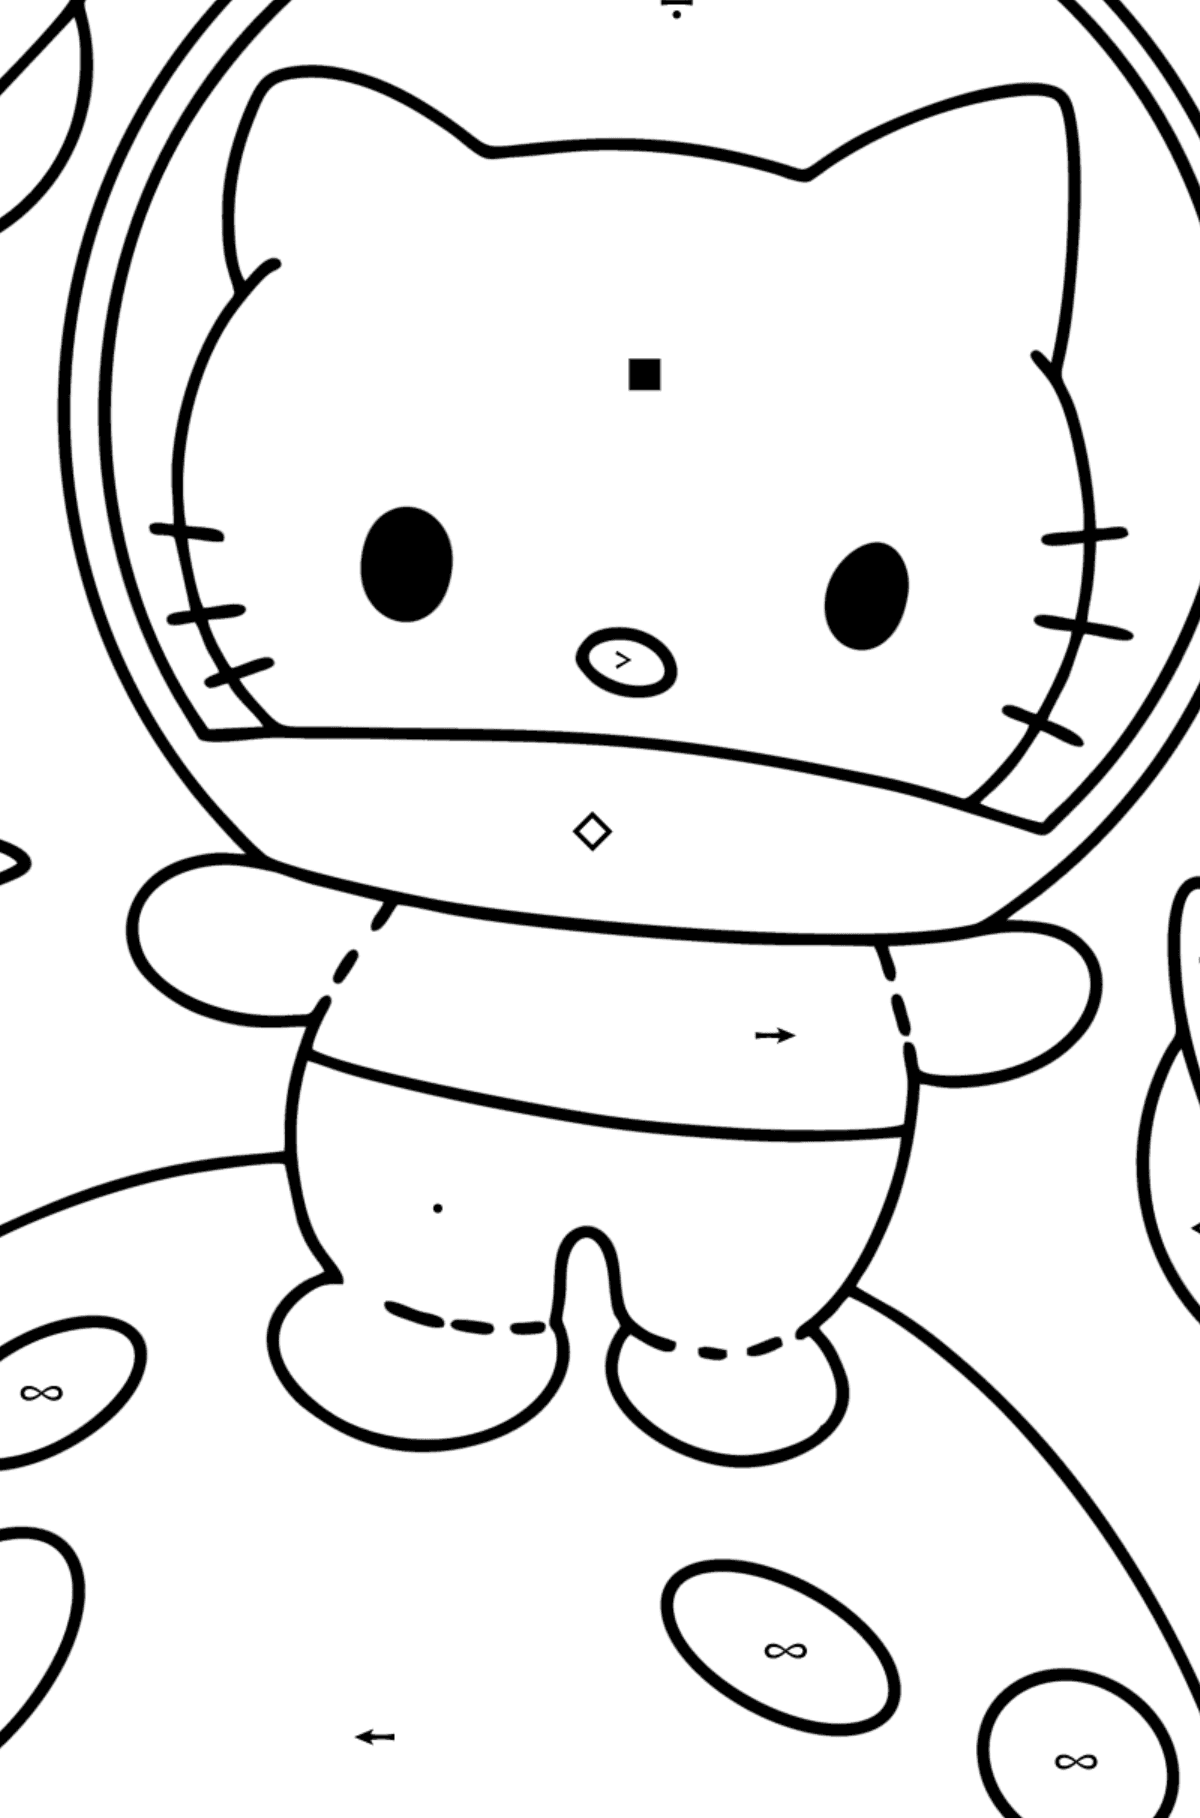 Hello Kitty Astronaut coloring page - Coloring by Symbols for Kids